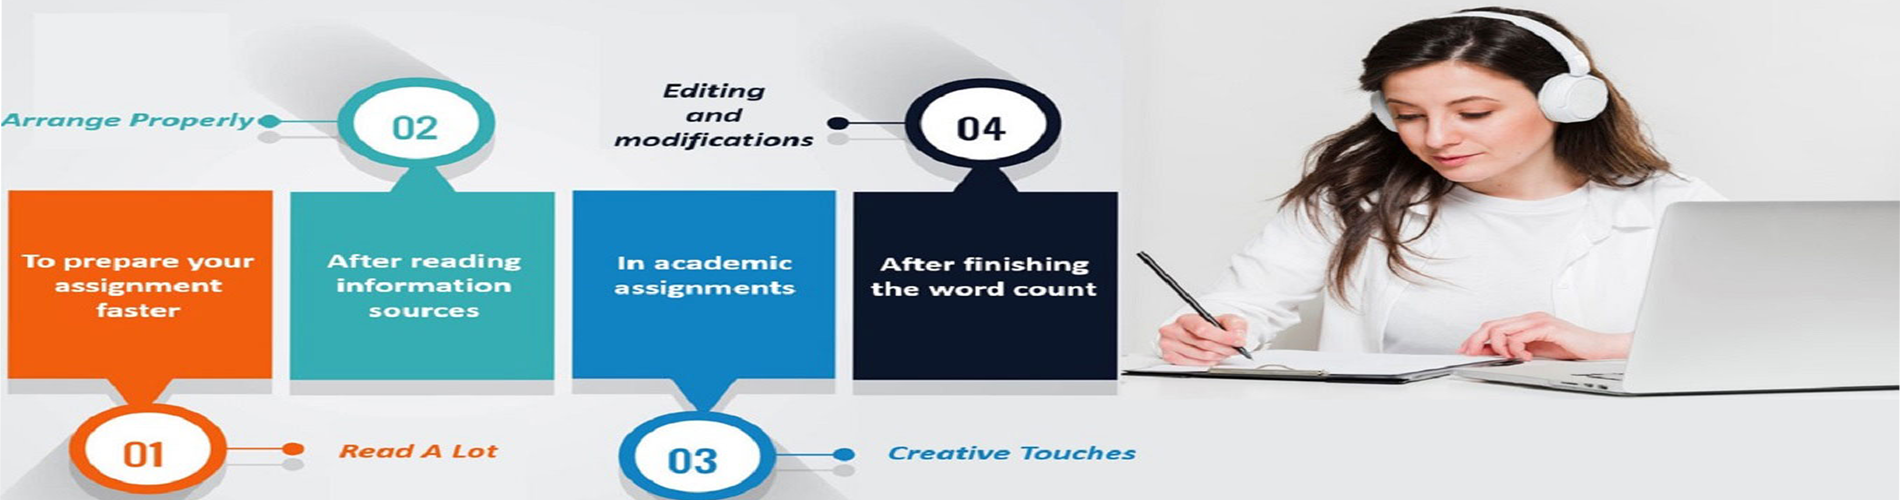 Dissertation review service proofreading